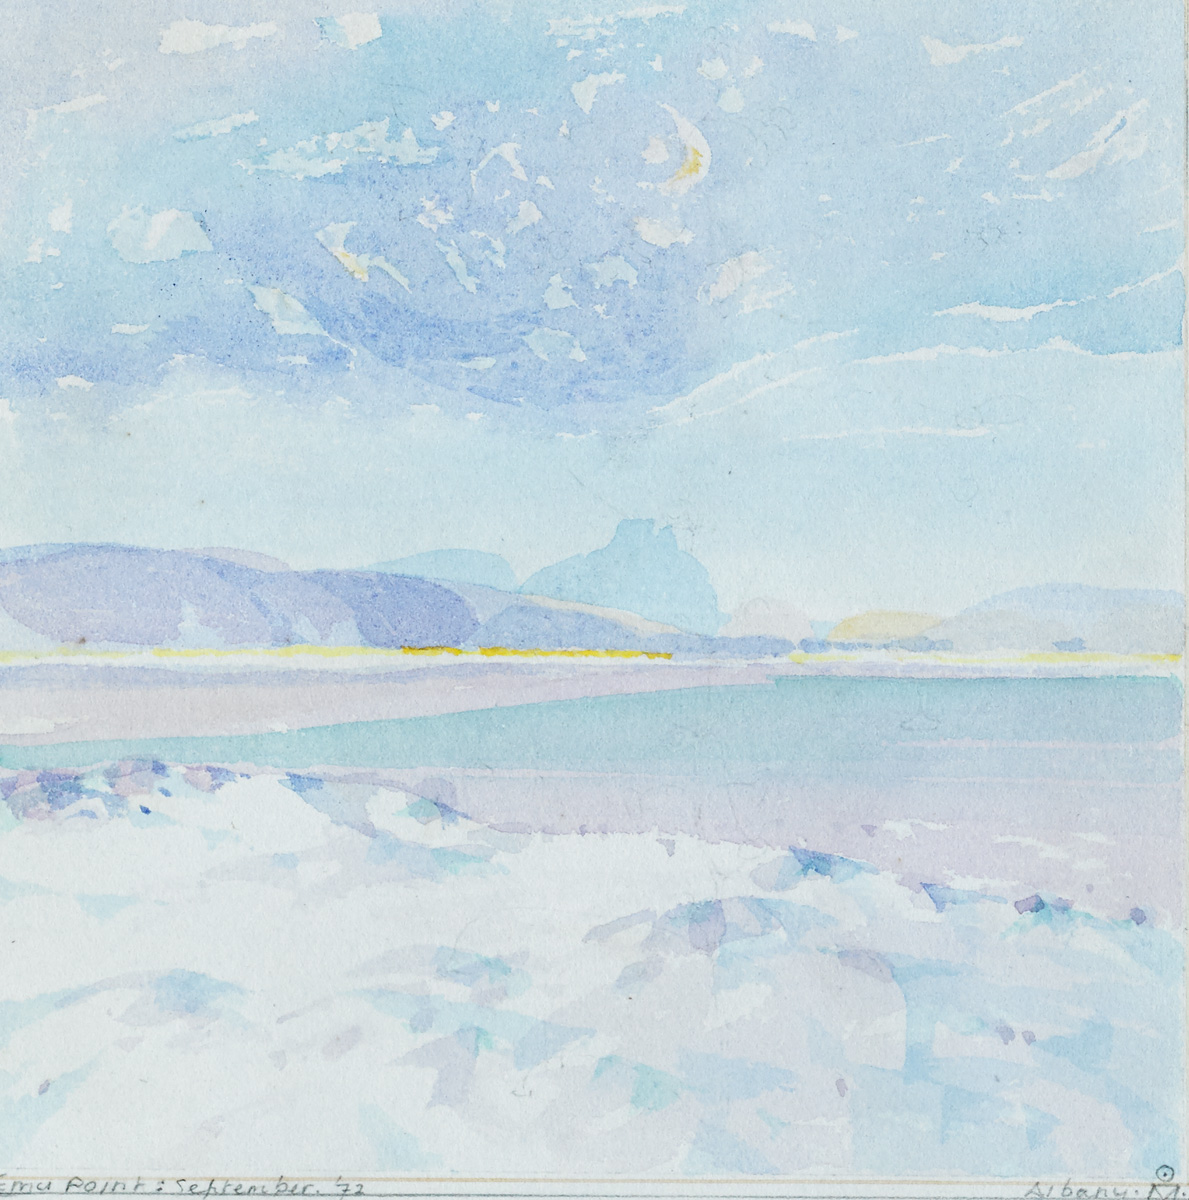 EMU POINT [AUSTRALIA], 1972 by Colin Middleton MBE RHA (1910-1983) at Whyte's Auctions